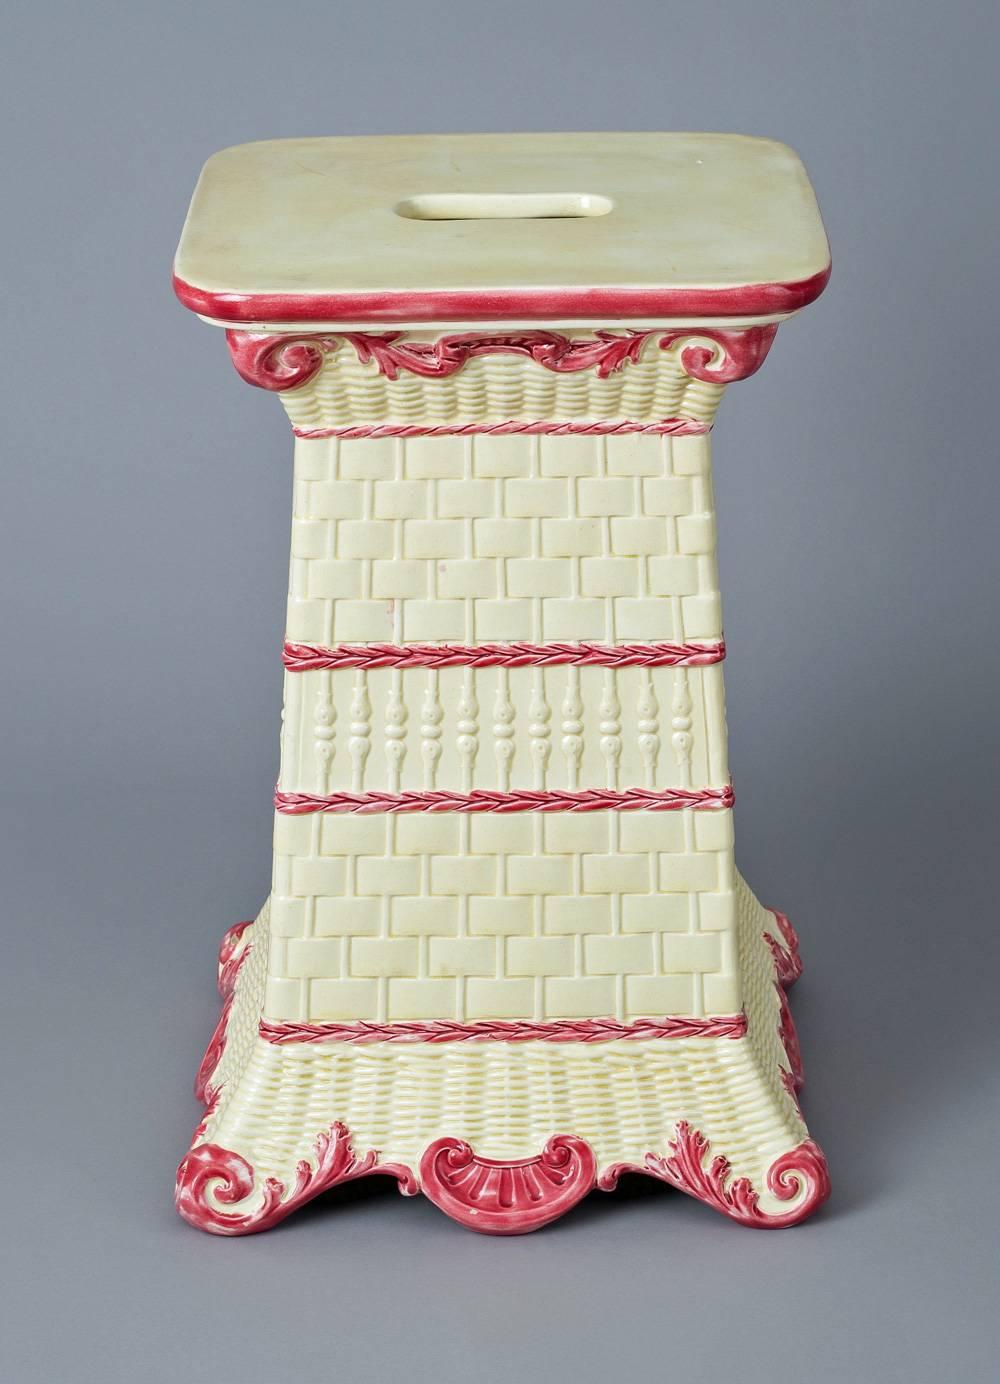 Antique Wedgwood garden seat decorated with four different basket weave designs each separated by dark pink chains, the top with open handle, the top edge outlined in pink, the top and shaped base of shells also decorated in dark pink. The inside